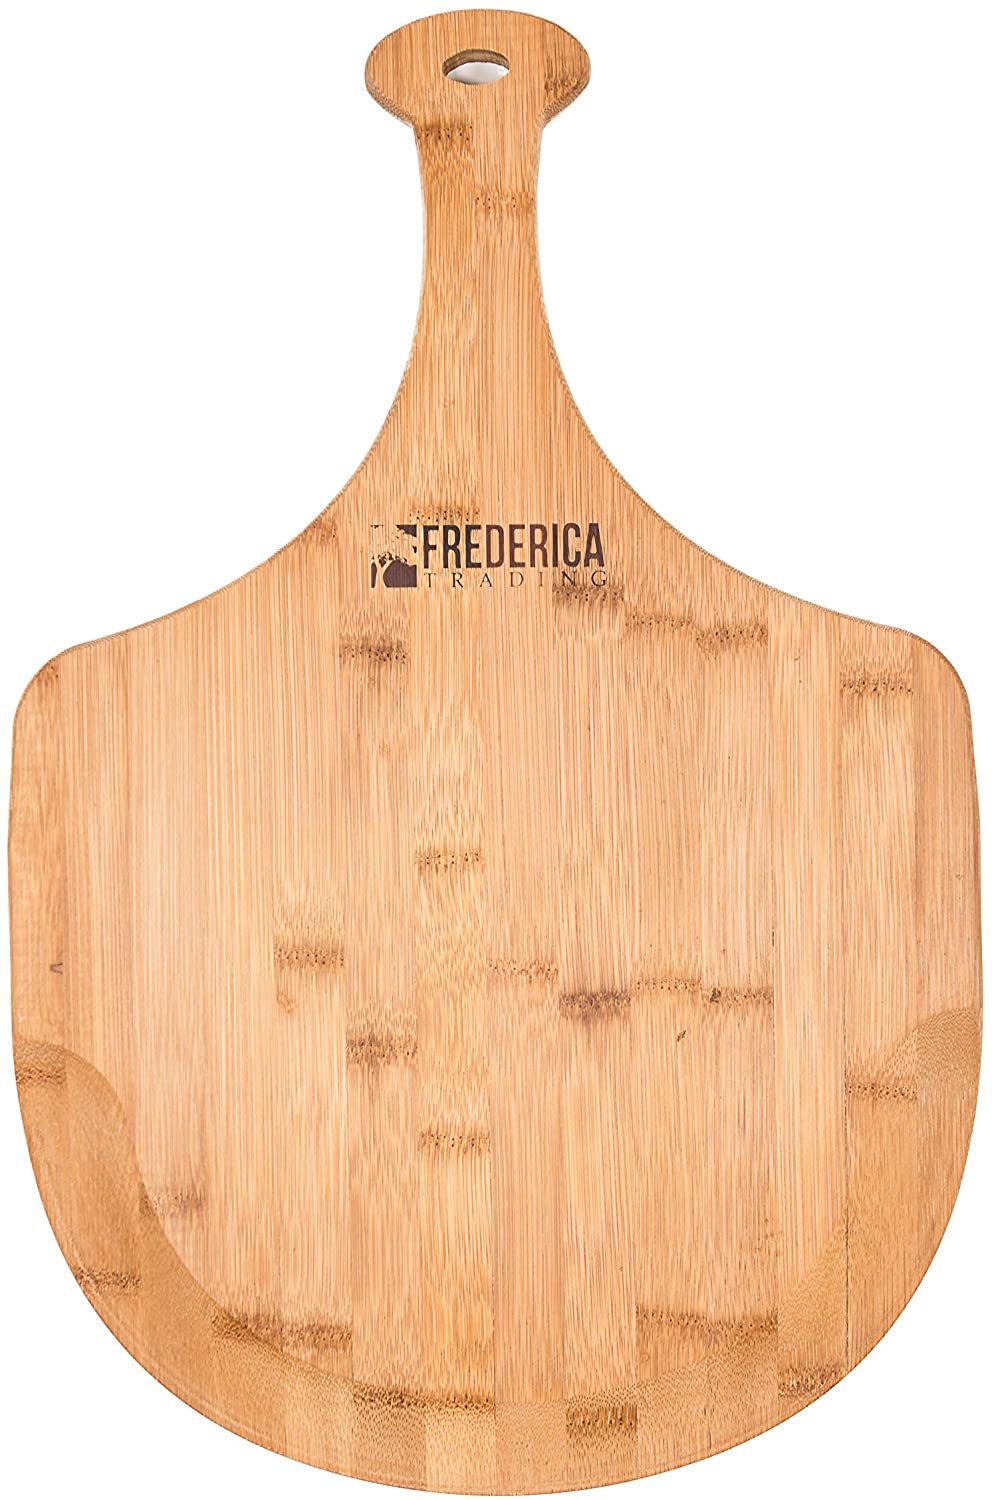 Premium Natural Bamboo Pizza Peel Paddle and Cutting Board (For Pizza, Fruit, Vegetables, Cheese) - BagLunchproduct,corp